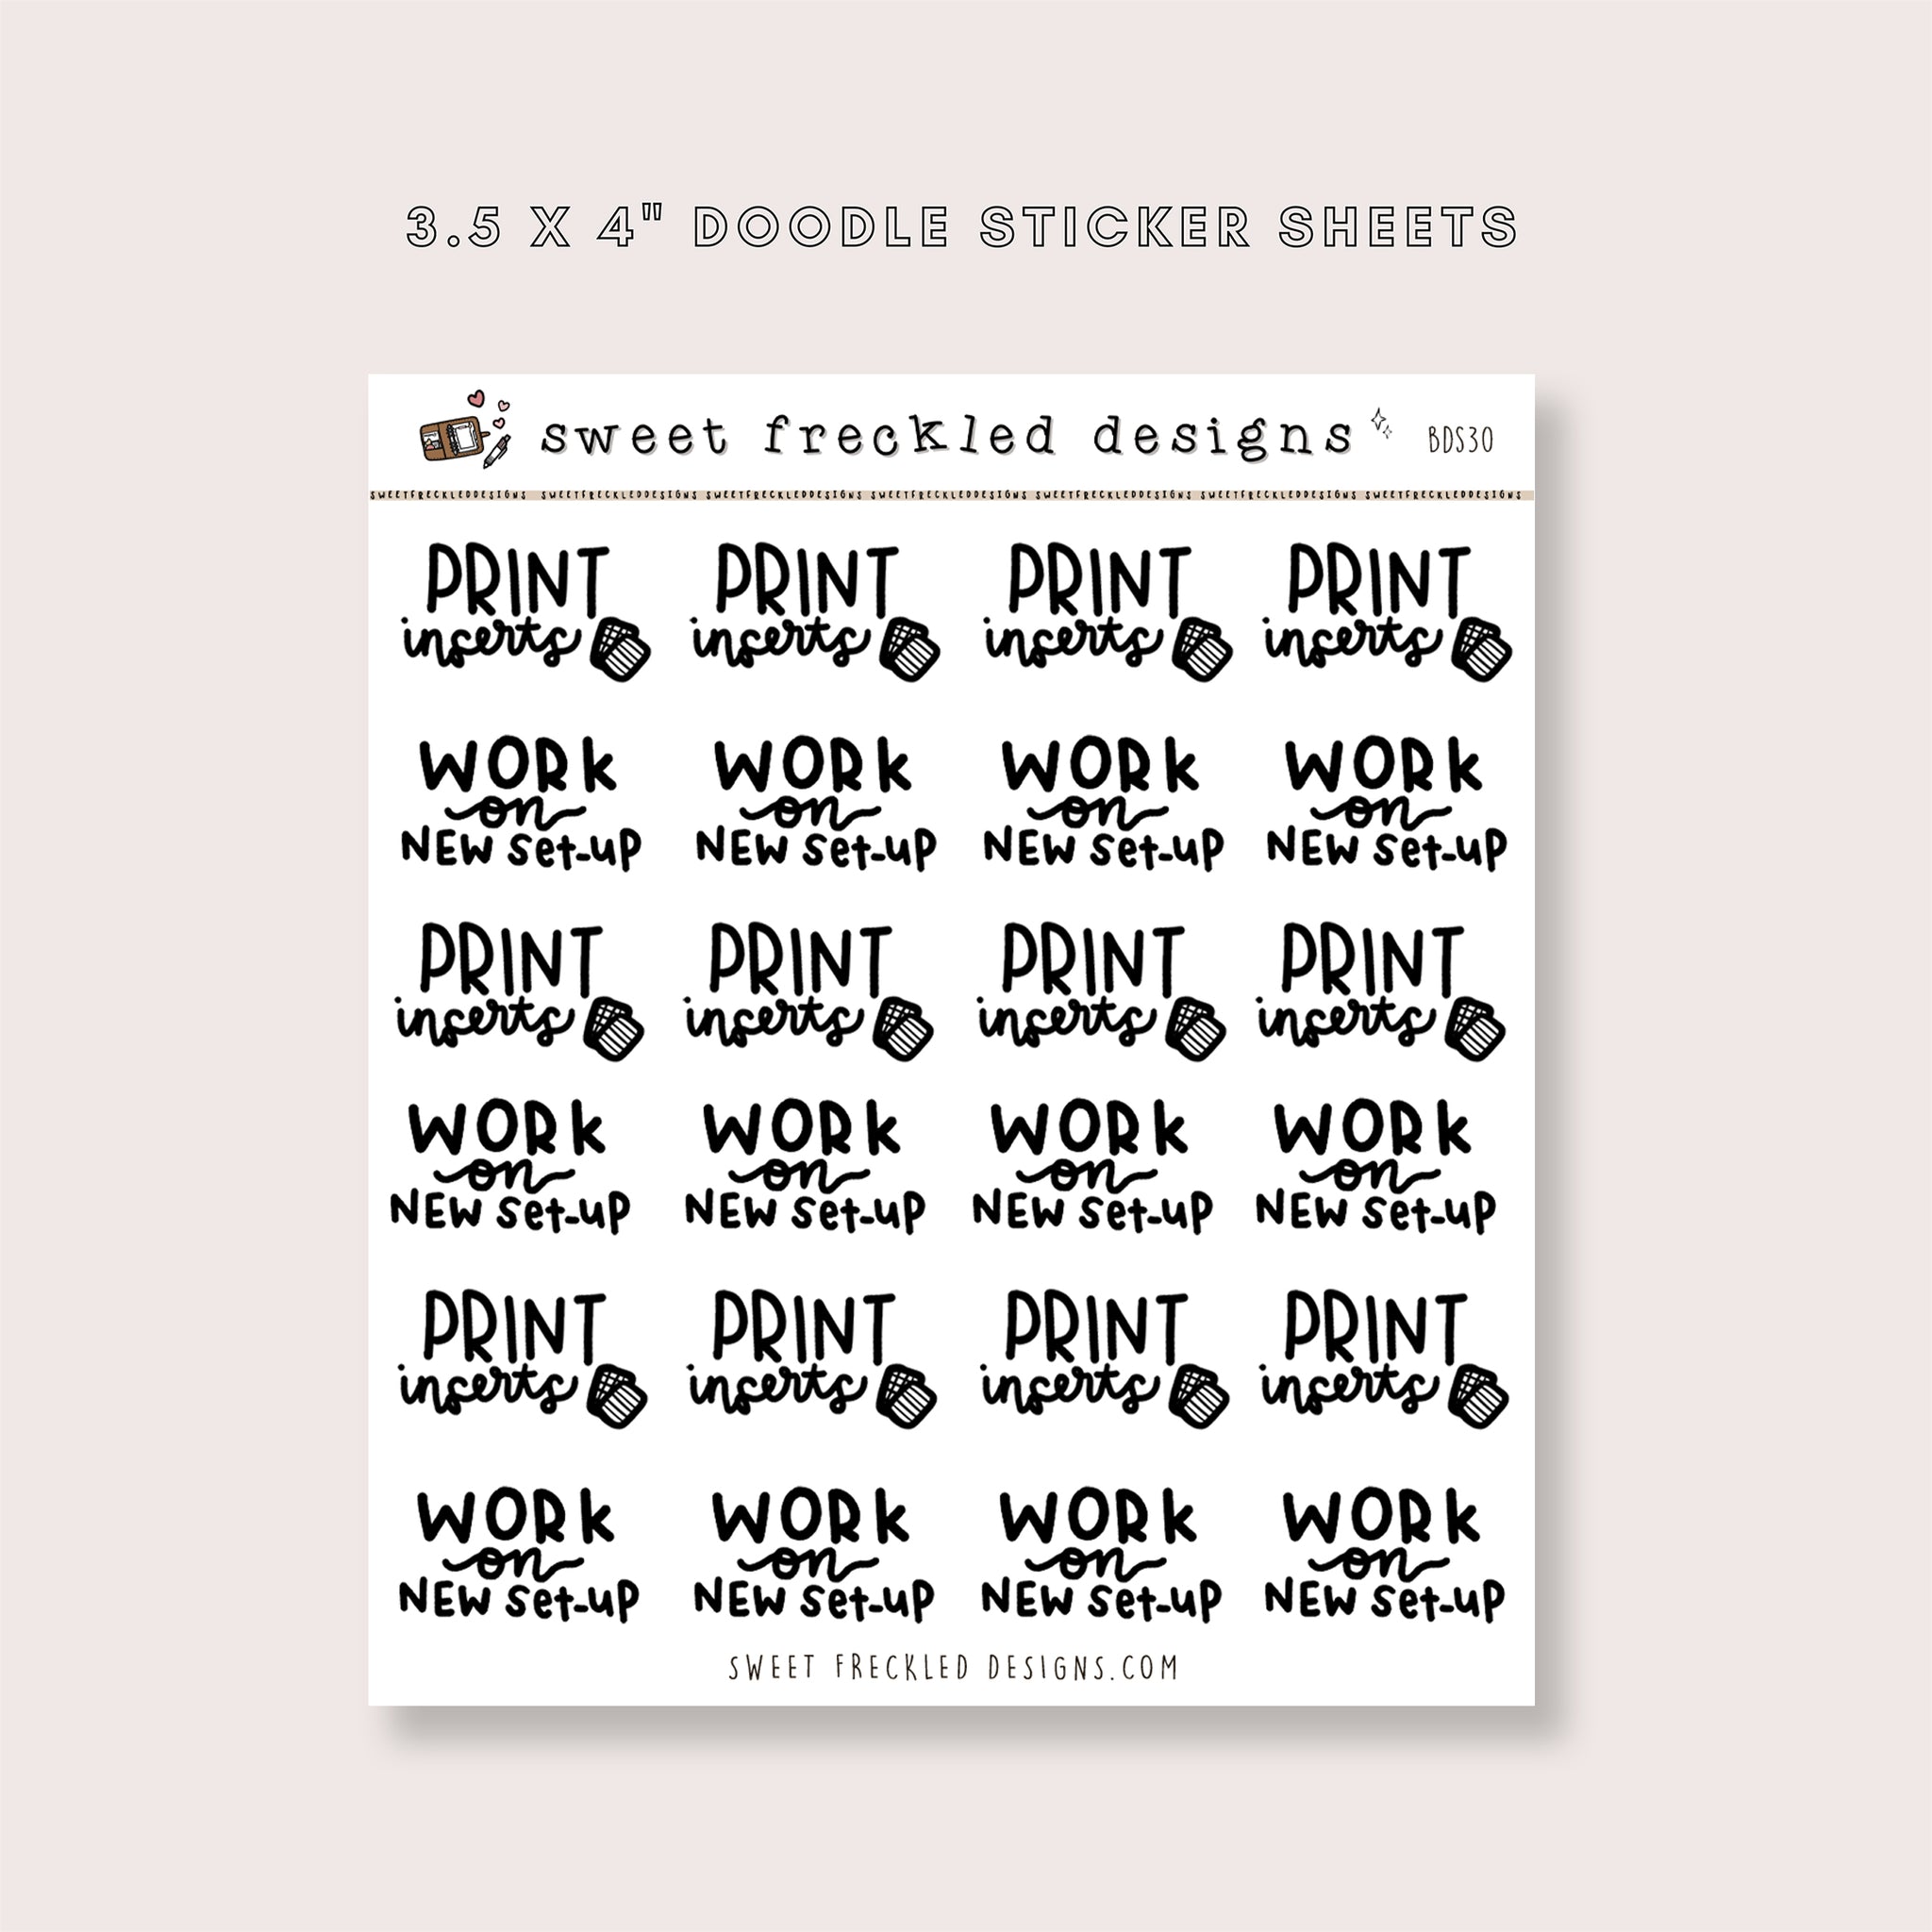 Print Inserts Work on Planner Set Up Stickers